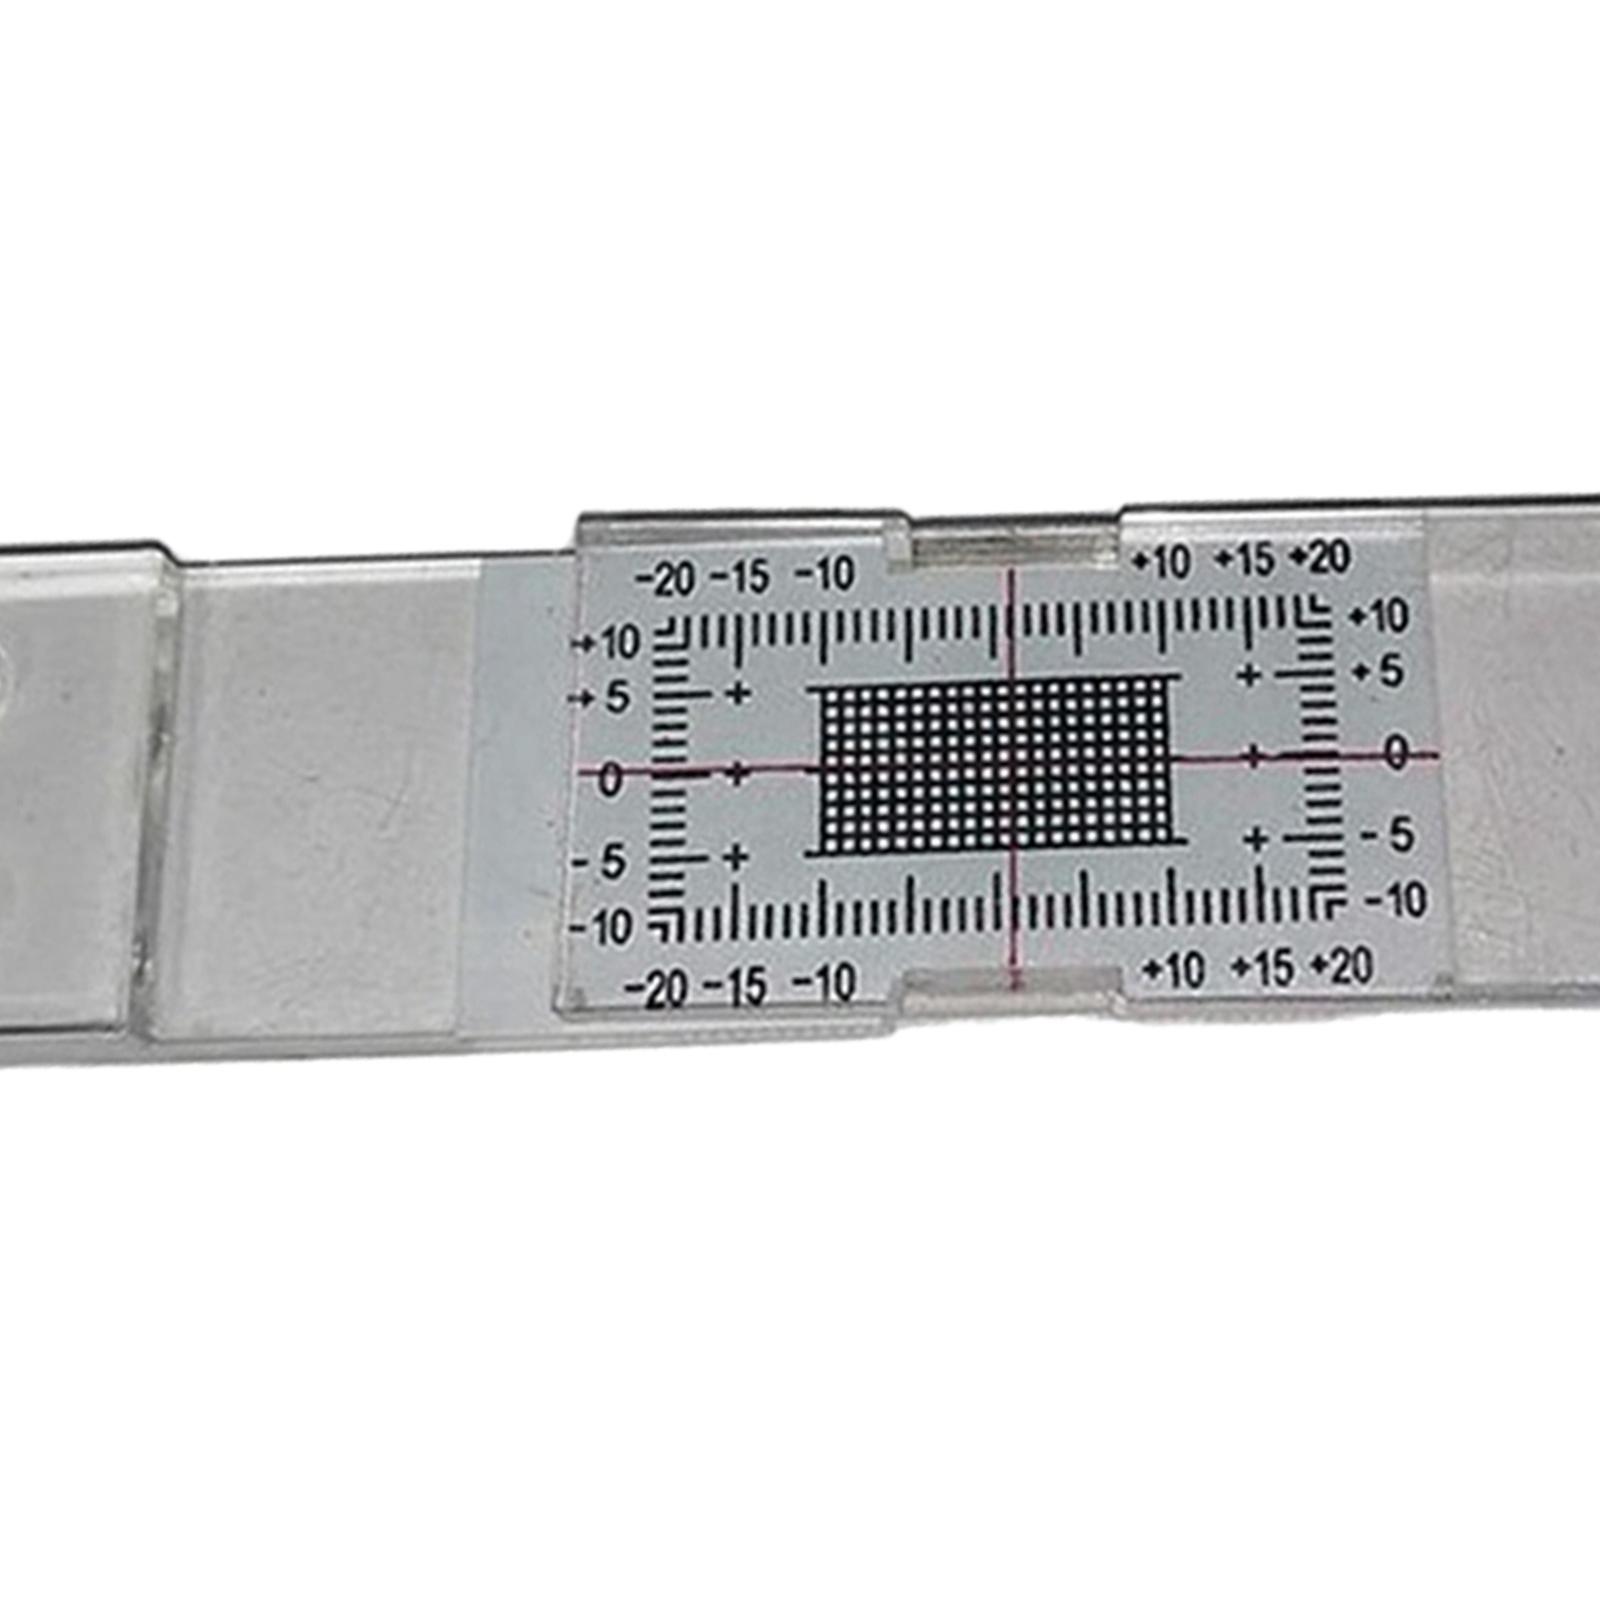 Acrylic Crack Monitoring Record, Size Chart,Basement Crack Waterproof ,Road  Pavement Marker Meter Record,Mixing Ratio Ruler